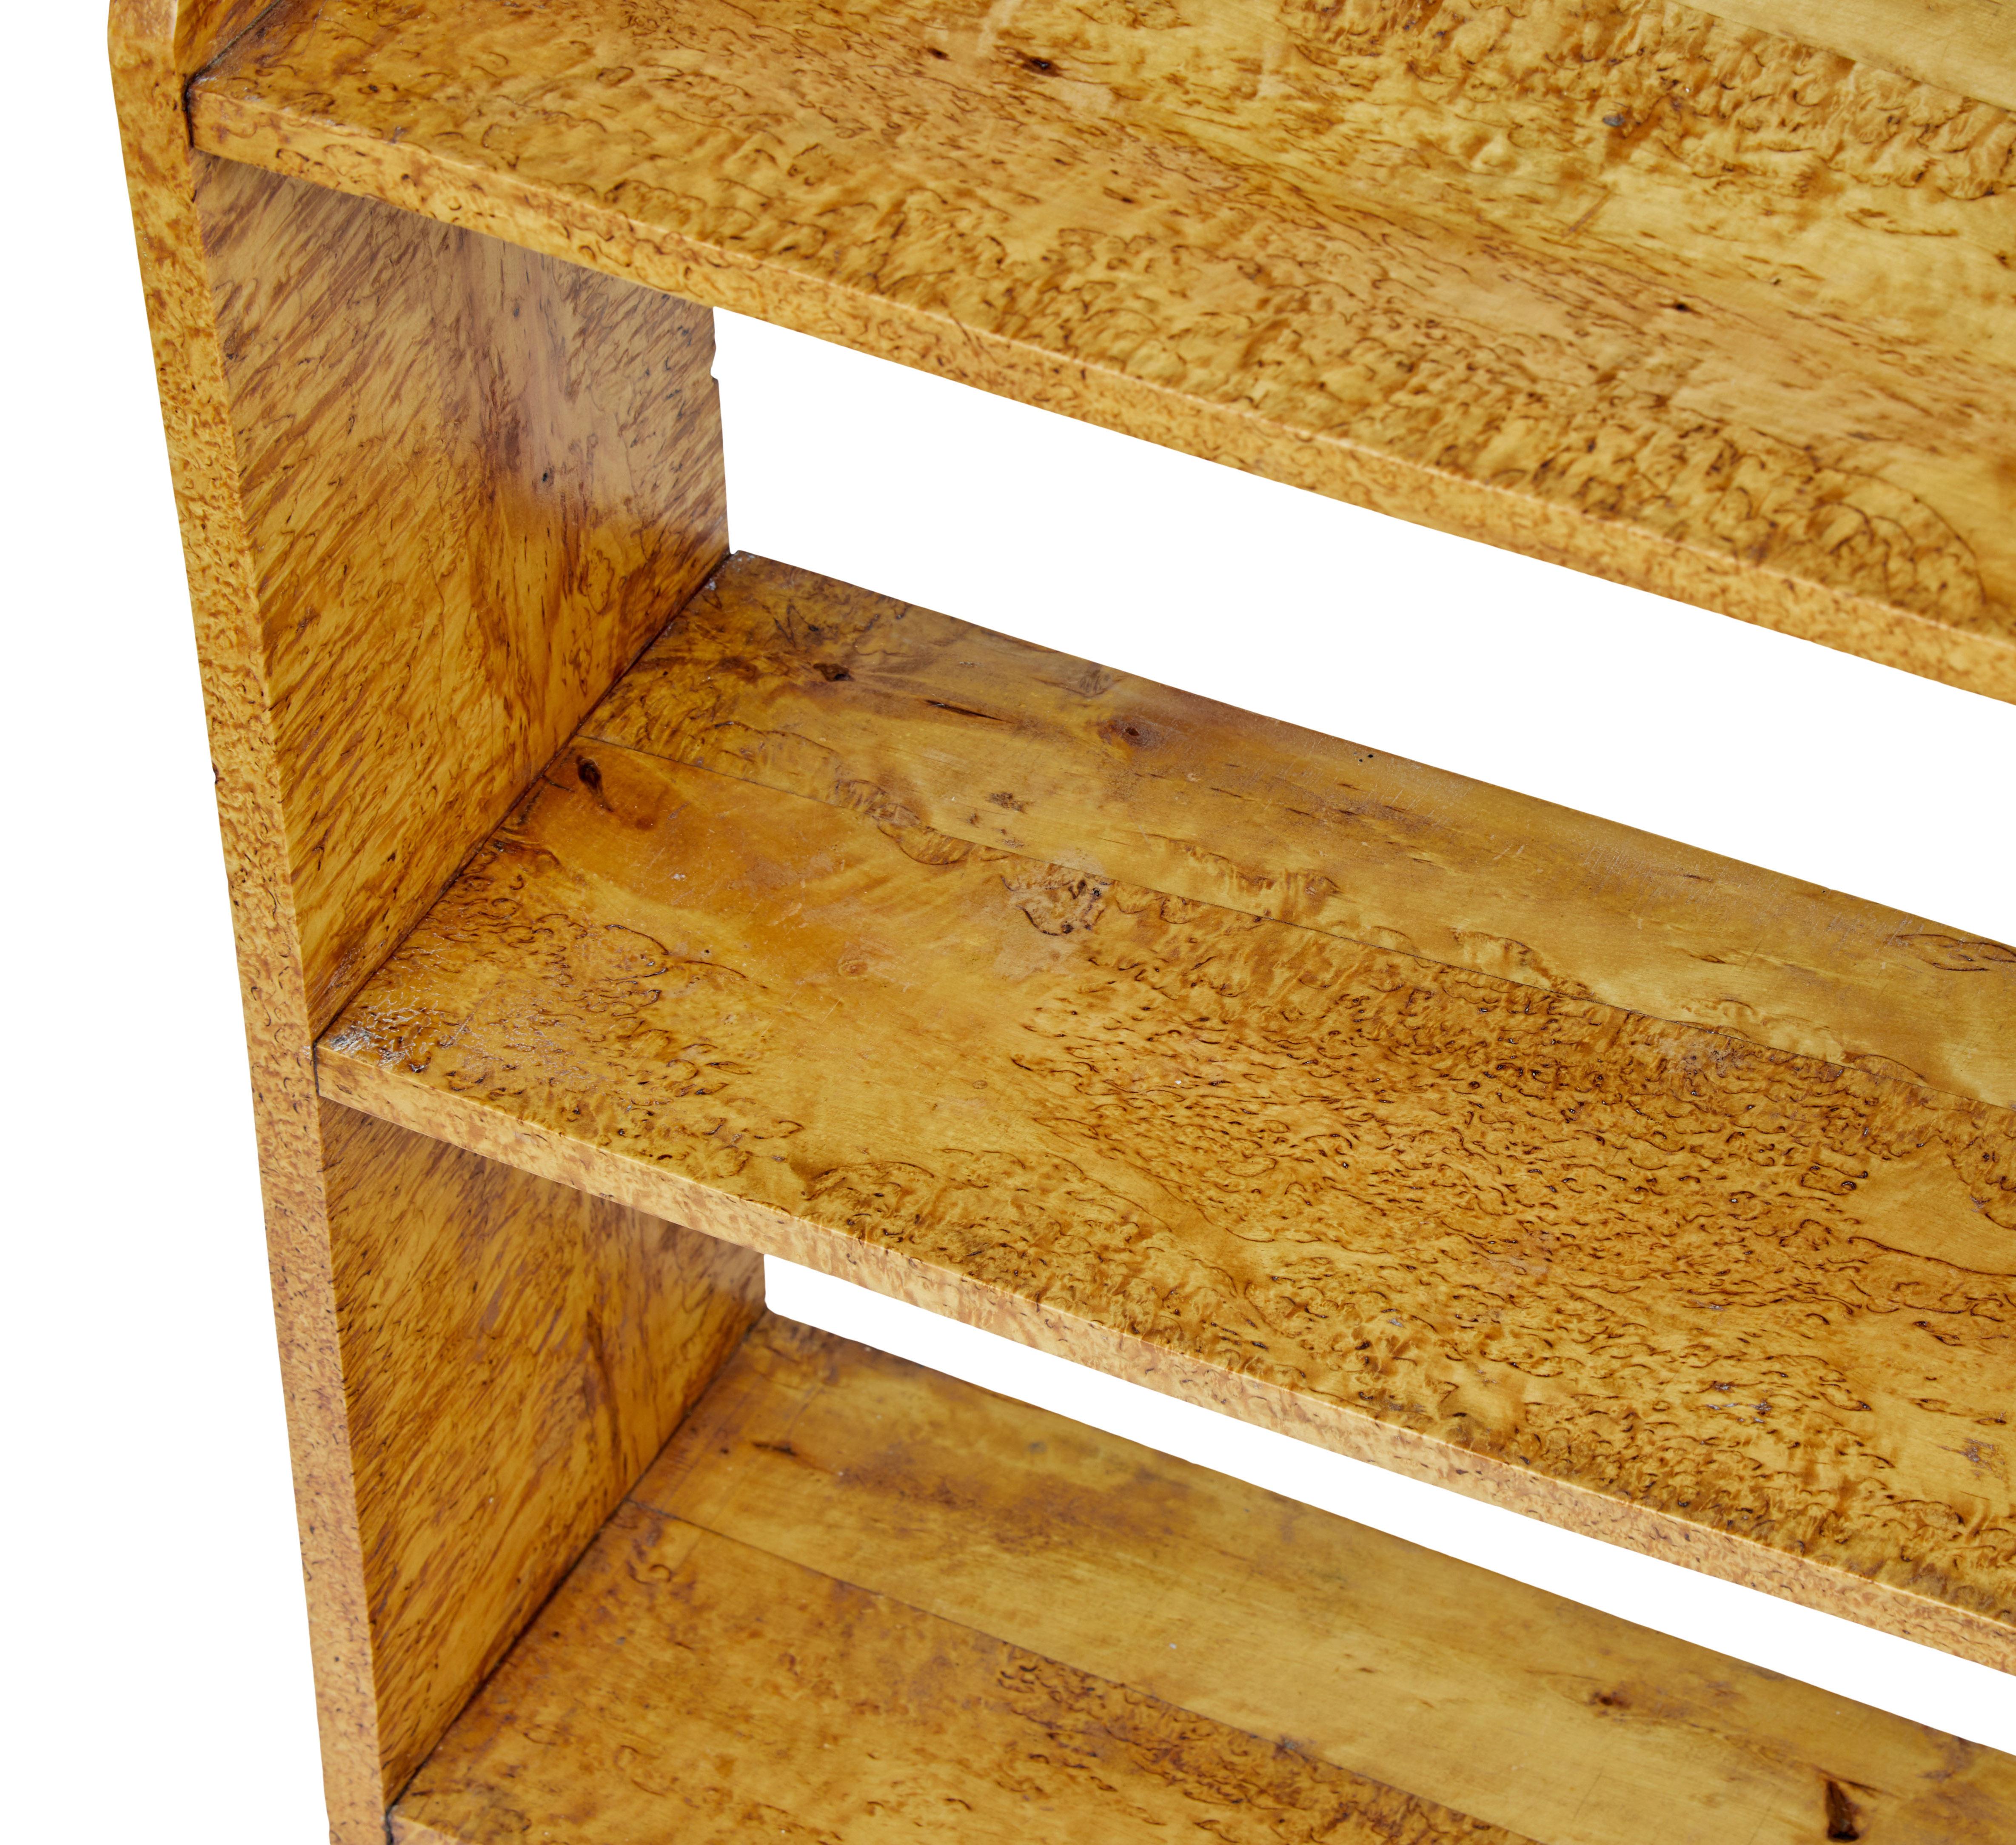 Rustic Swedish birch hanging wall shelving, circa 1870.

Unusually made in birch root with its rich color and grain. 4 shelves.

Ideal in the kitchen or hallway.

Some natural warping to wood, structurally sound.